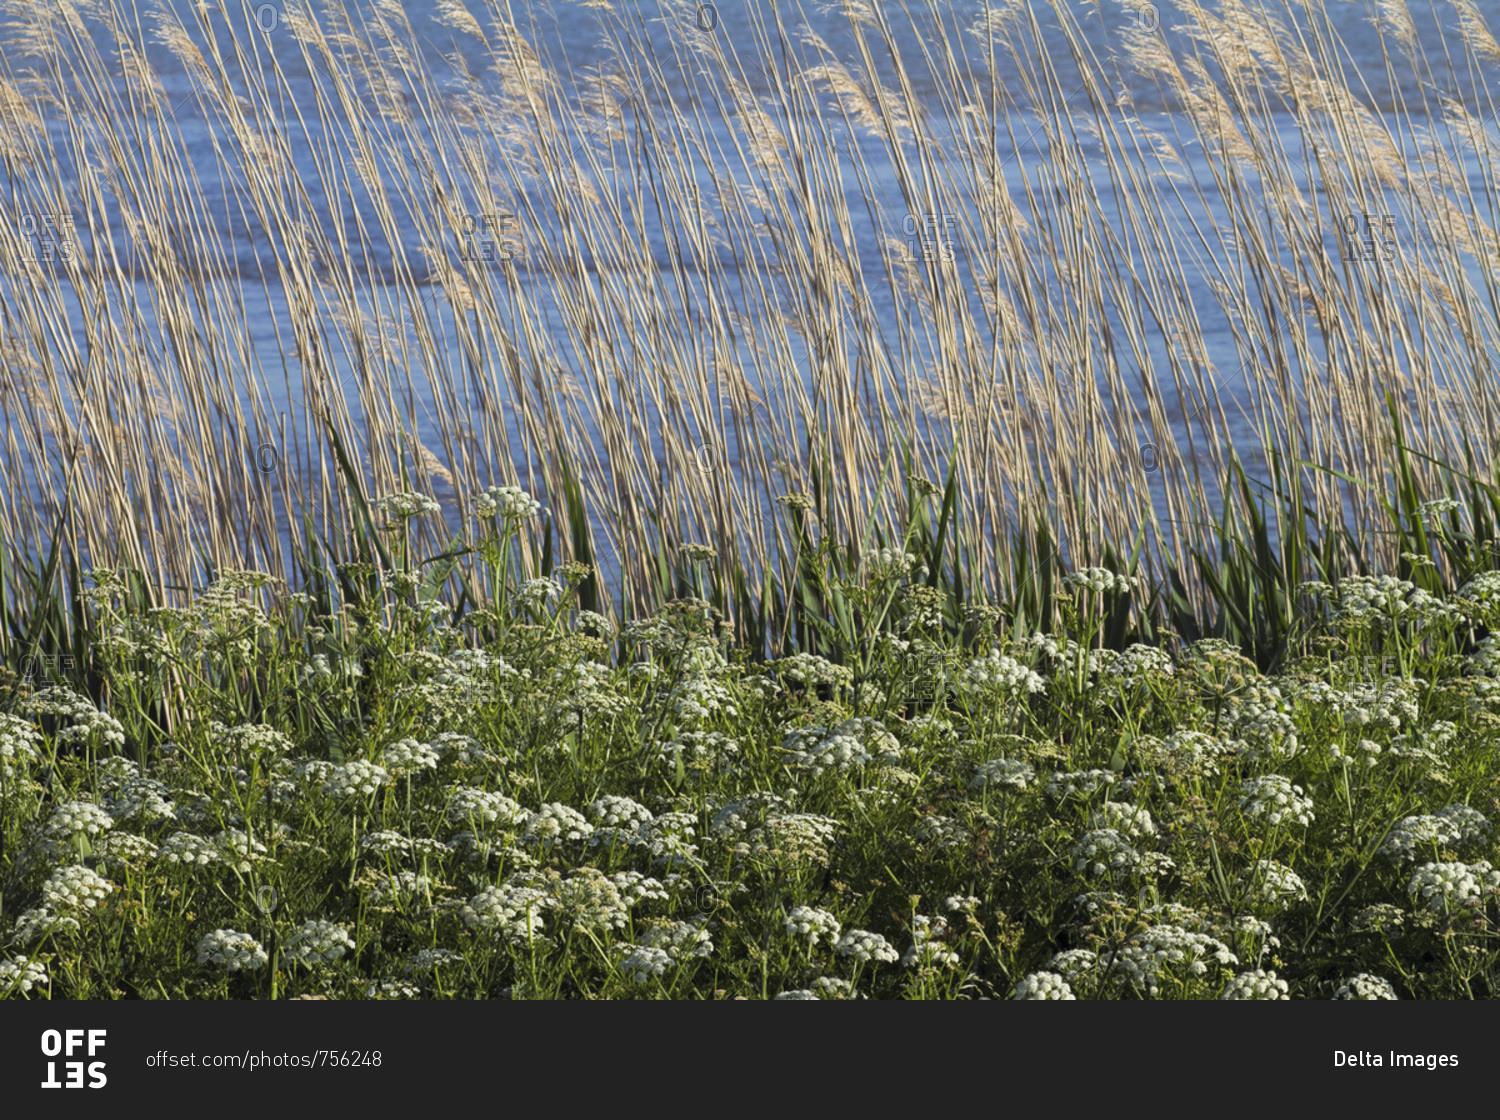 France, department 44, vegetation on the banks of the Loire, spring.